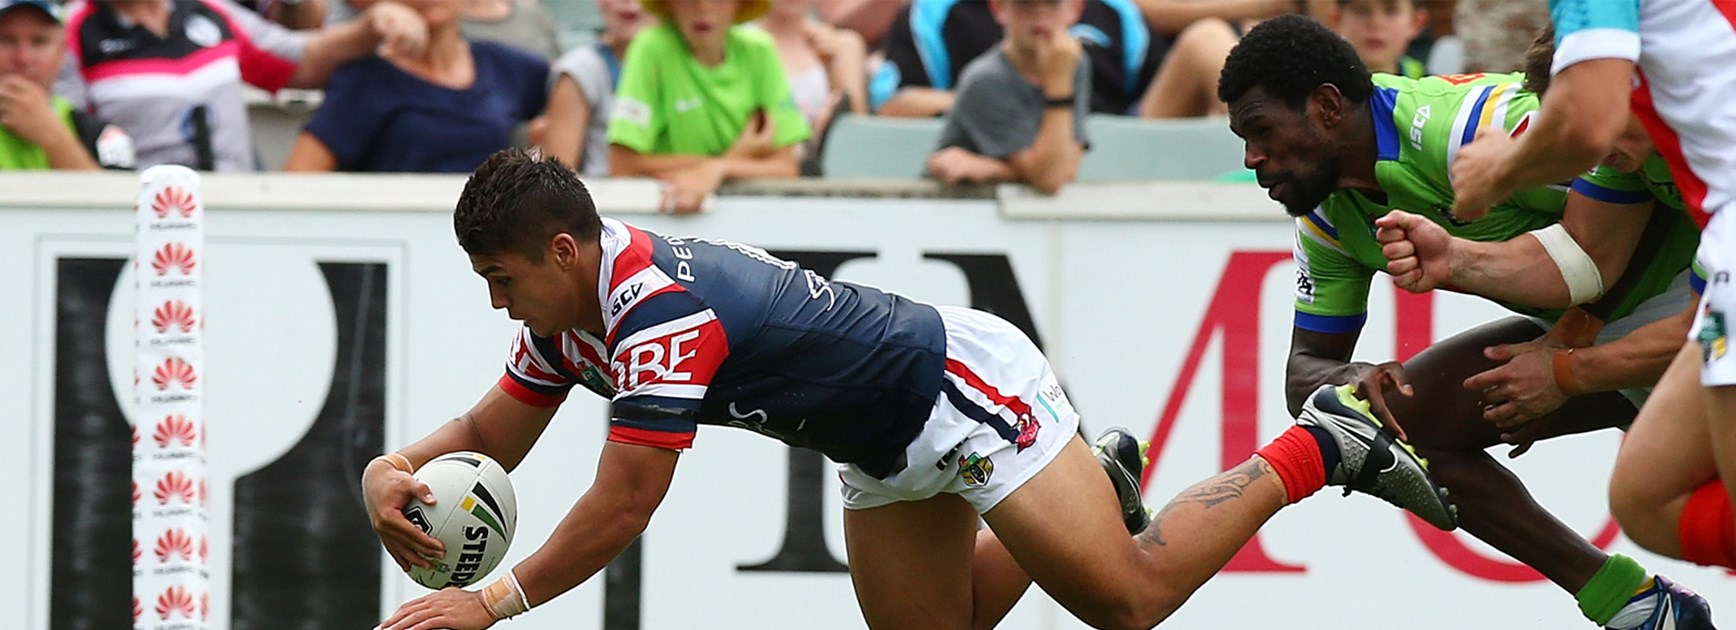 Jayden Nikorima dives over for his first NRL try against the Raiders in Round 2.